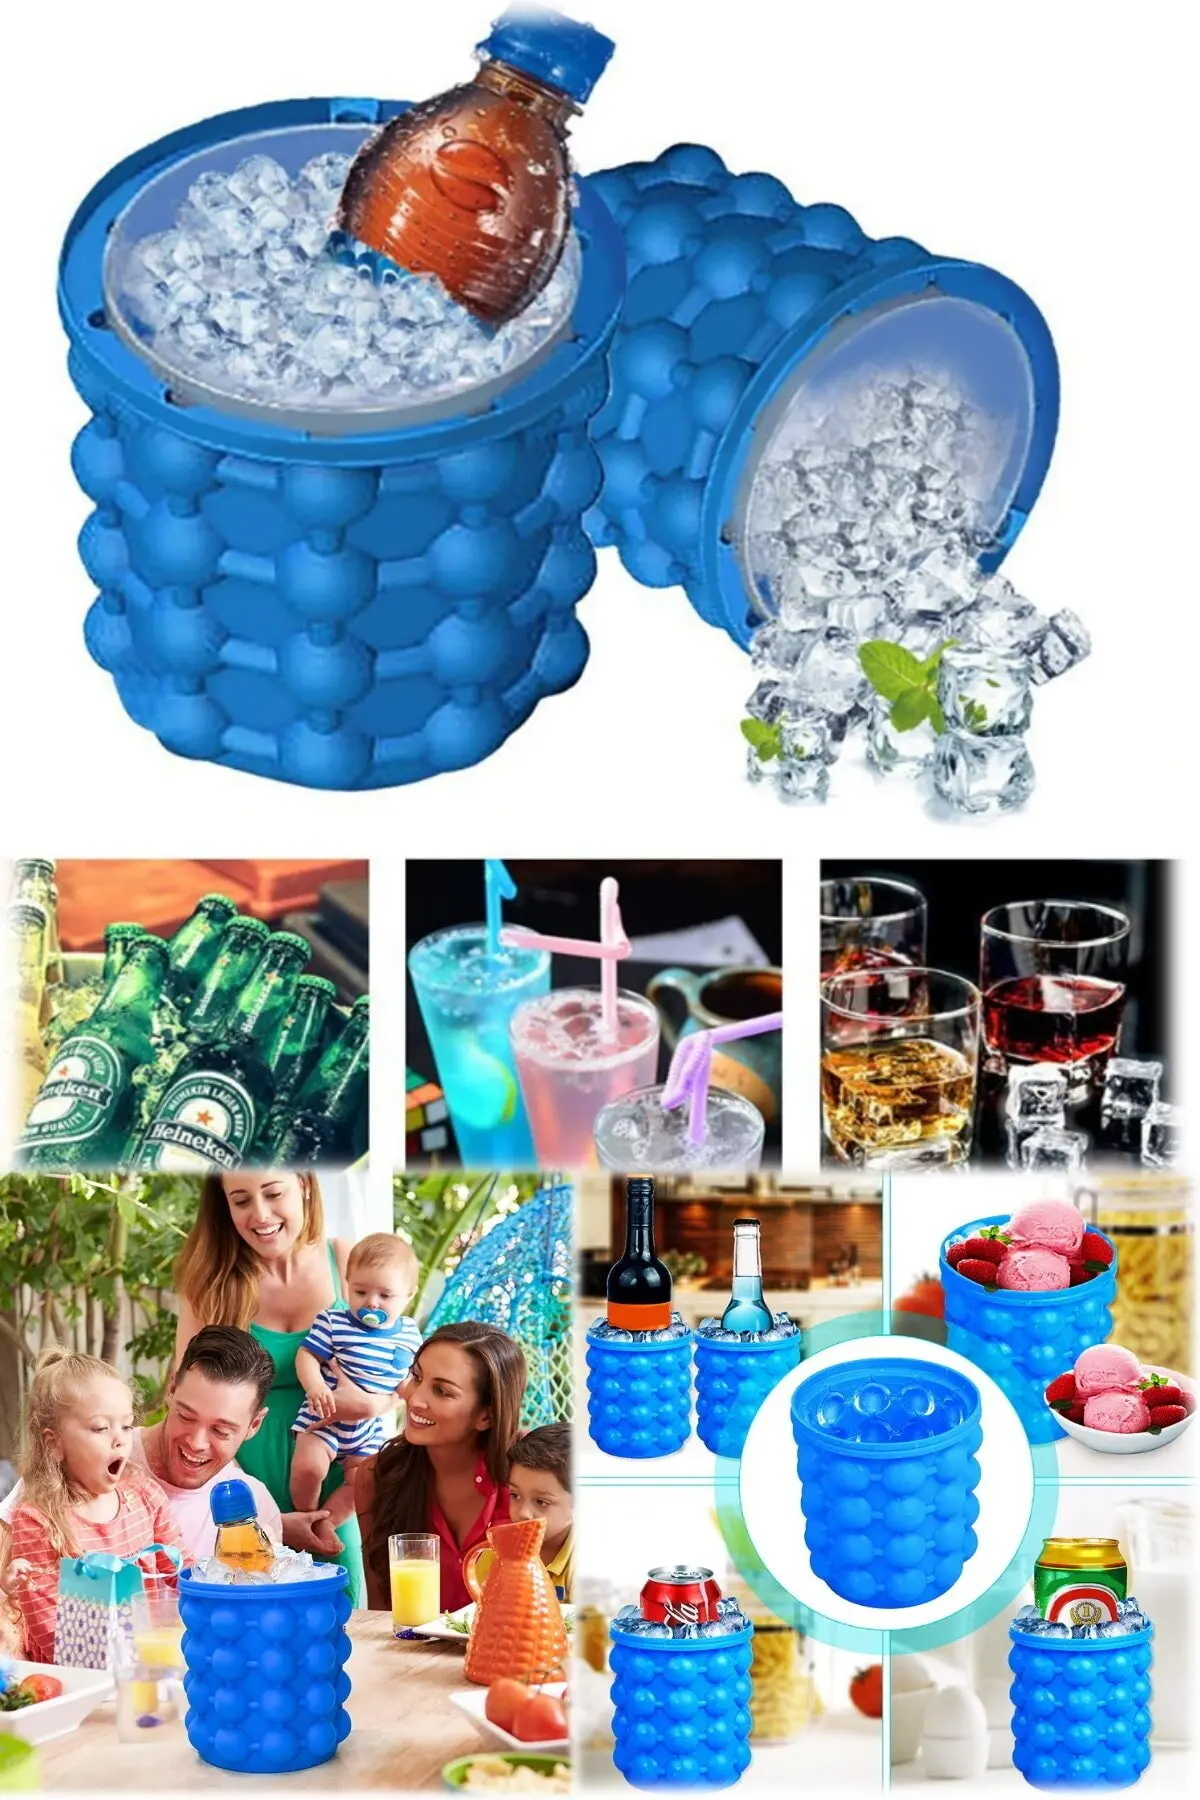 Trend Design Silicone This Mold Cup Look Ice Cooler Cup Holder Bottle Holder Fast Freezing Ice Cup Silicone 120 Ice Capacity